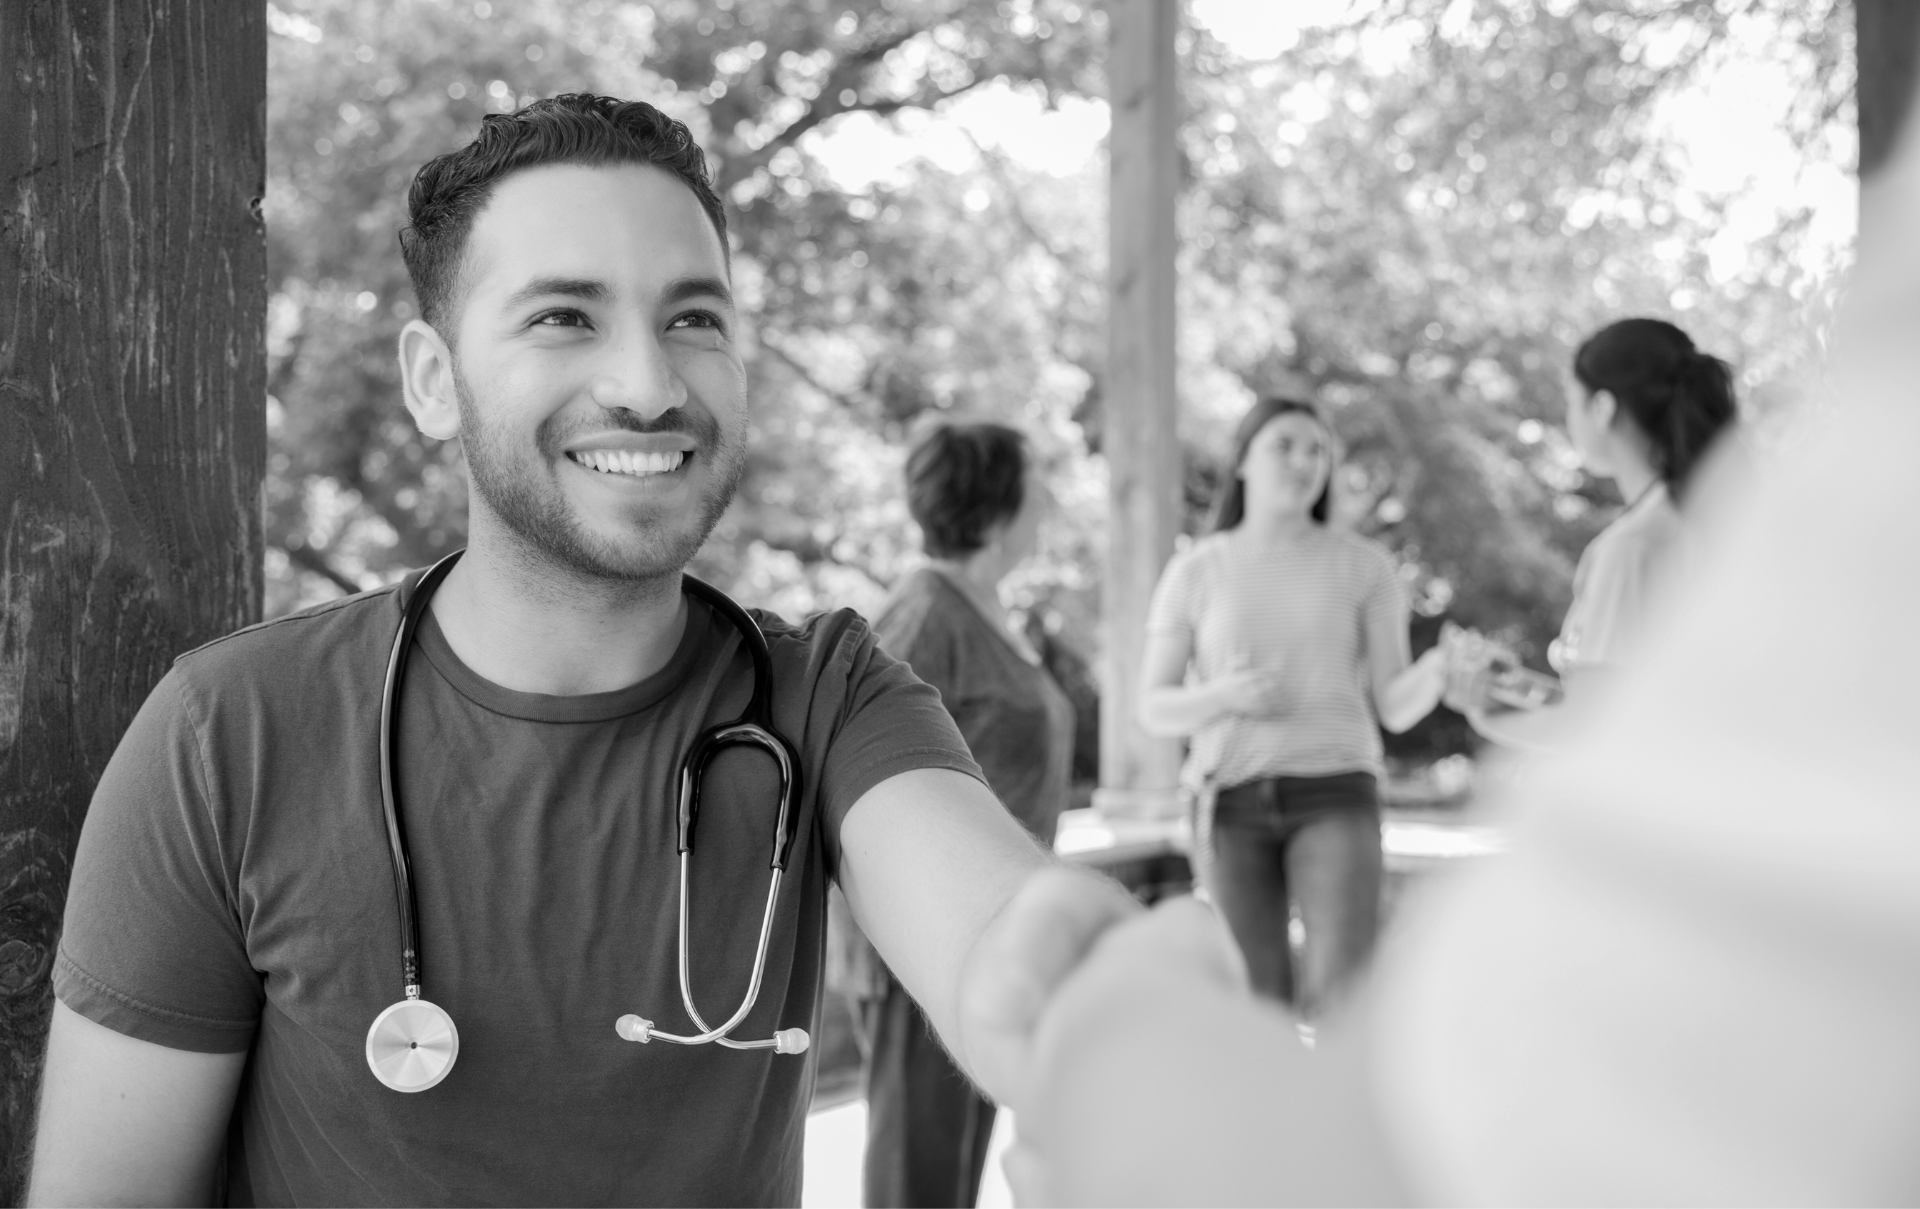 a young adult wearing a stethoscope stands outside speaking to someone. a group chats in the background